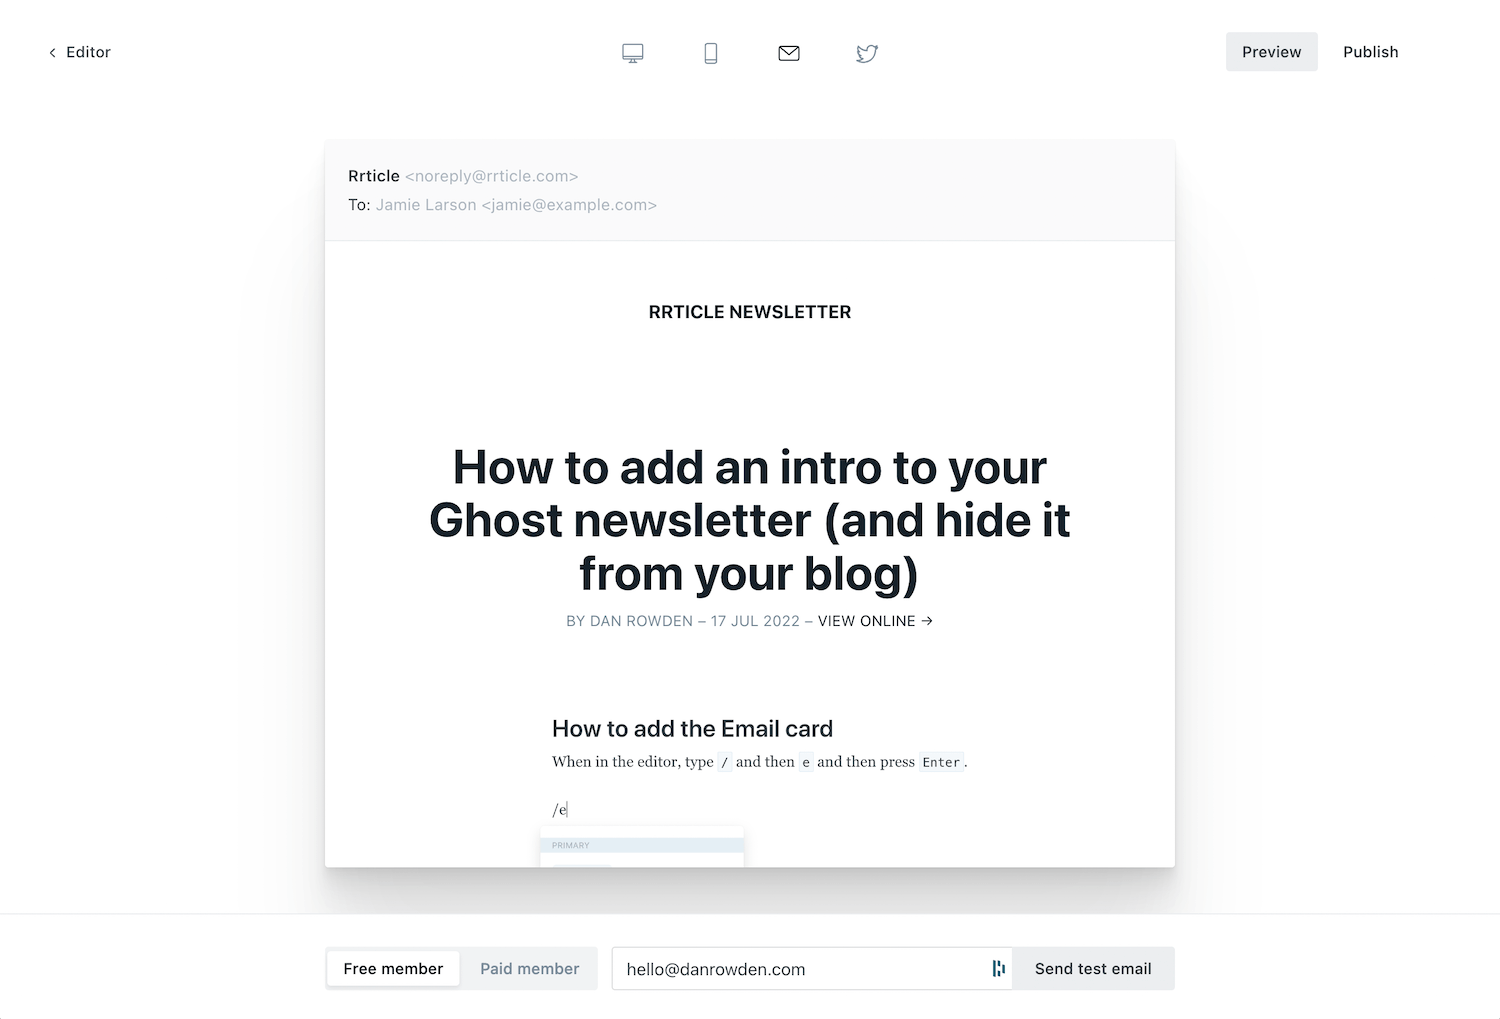 How to add an intro to your Ghost newsletter (and hide it from your blog)